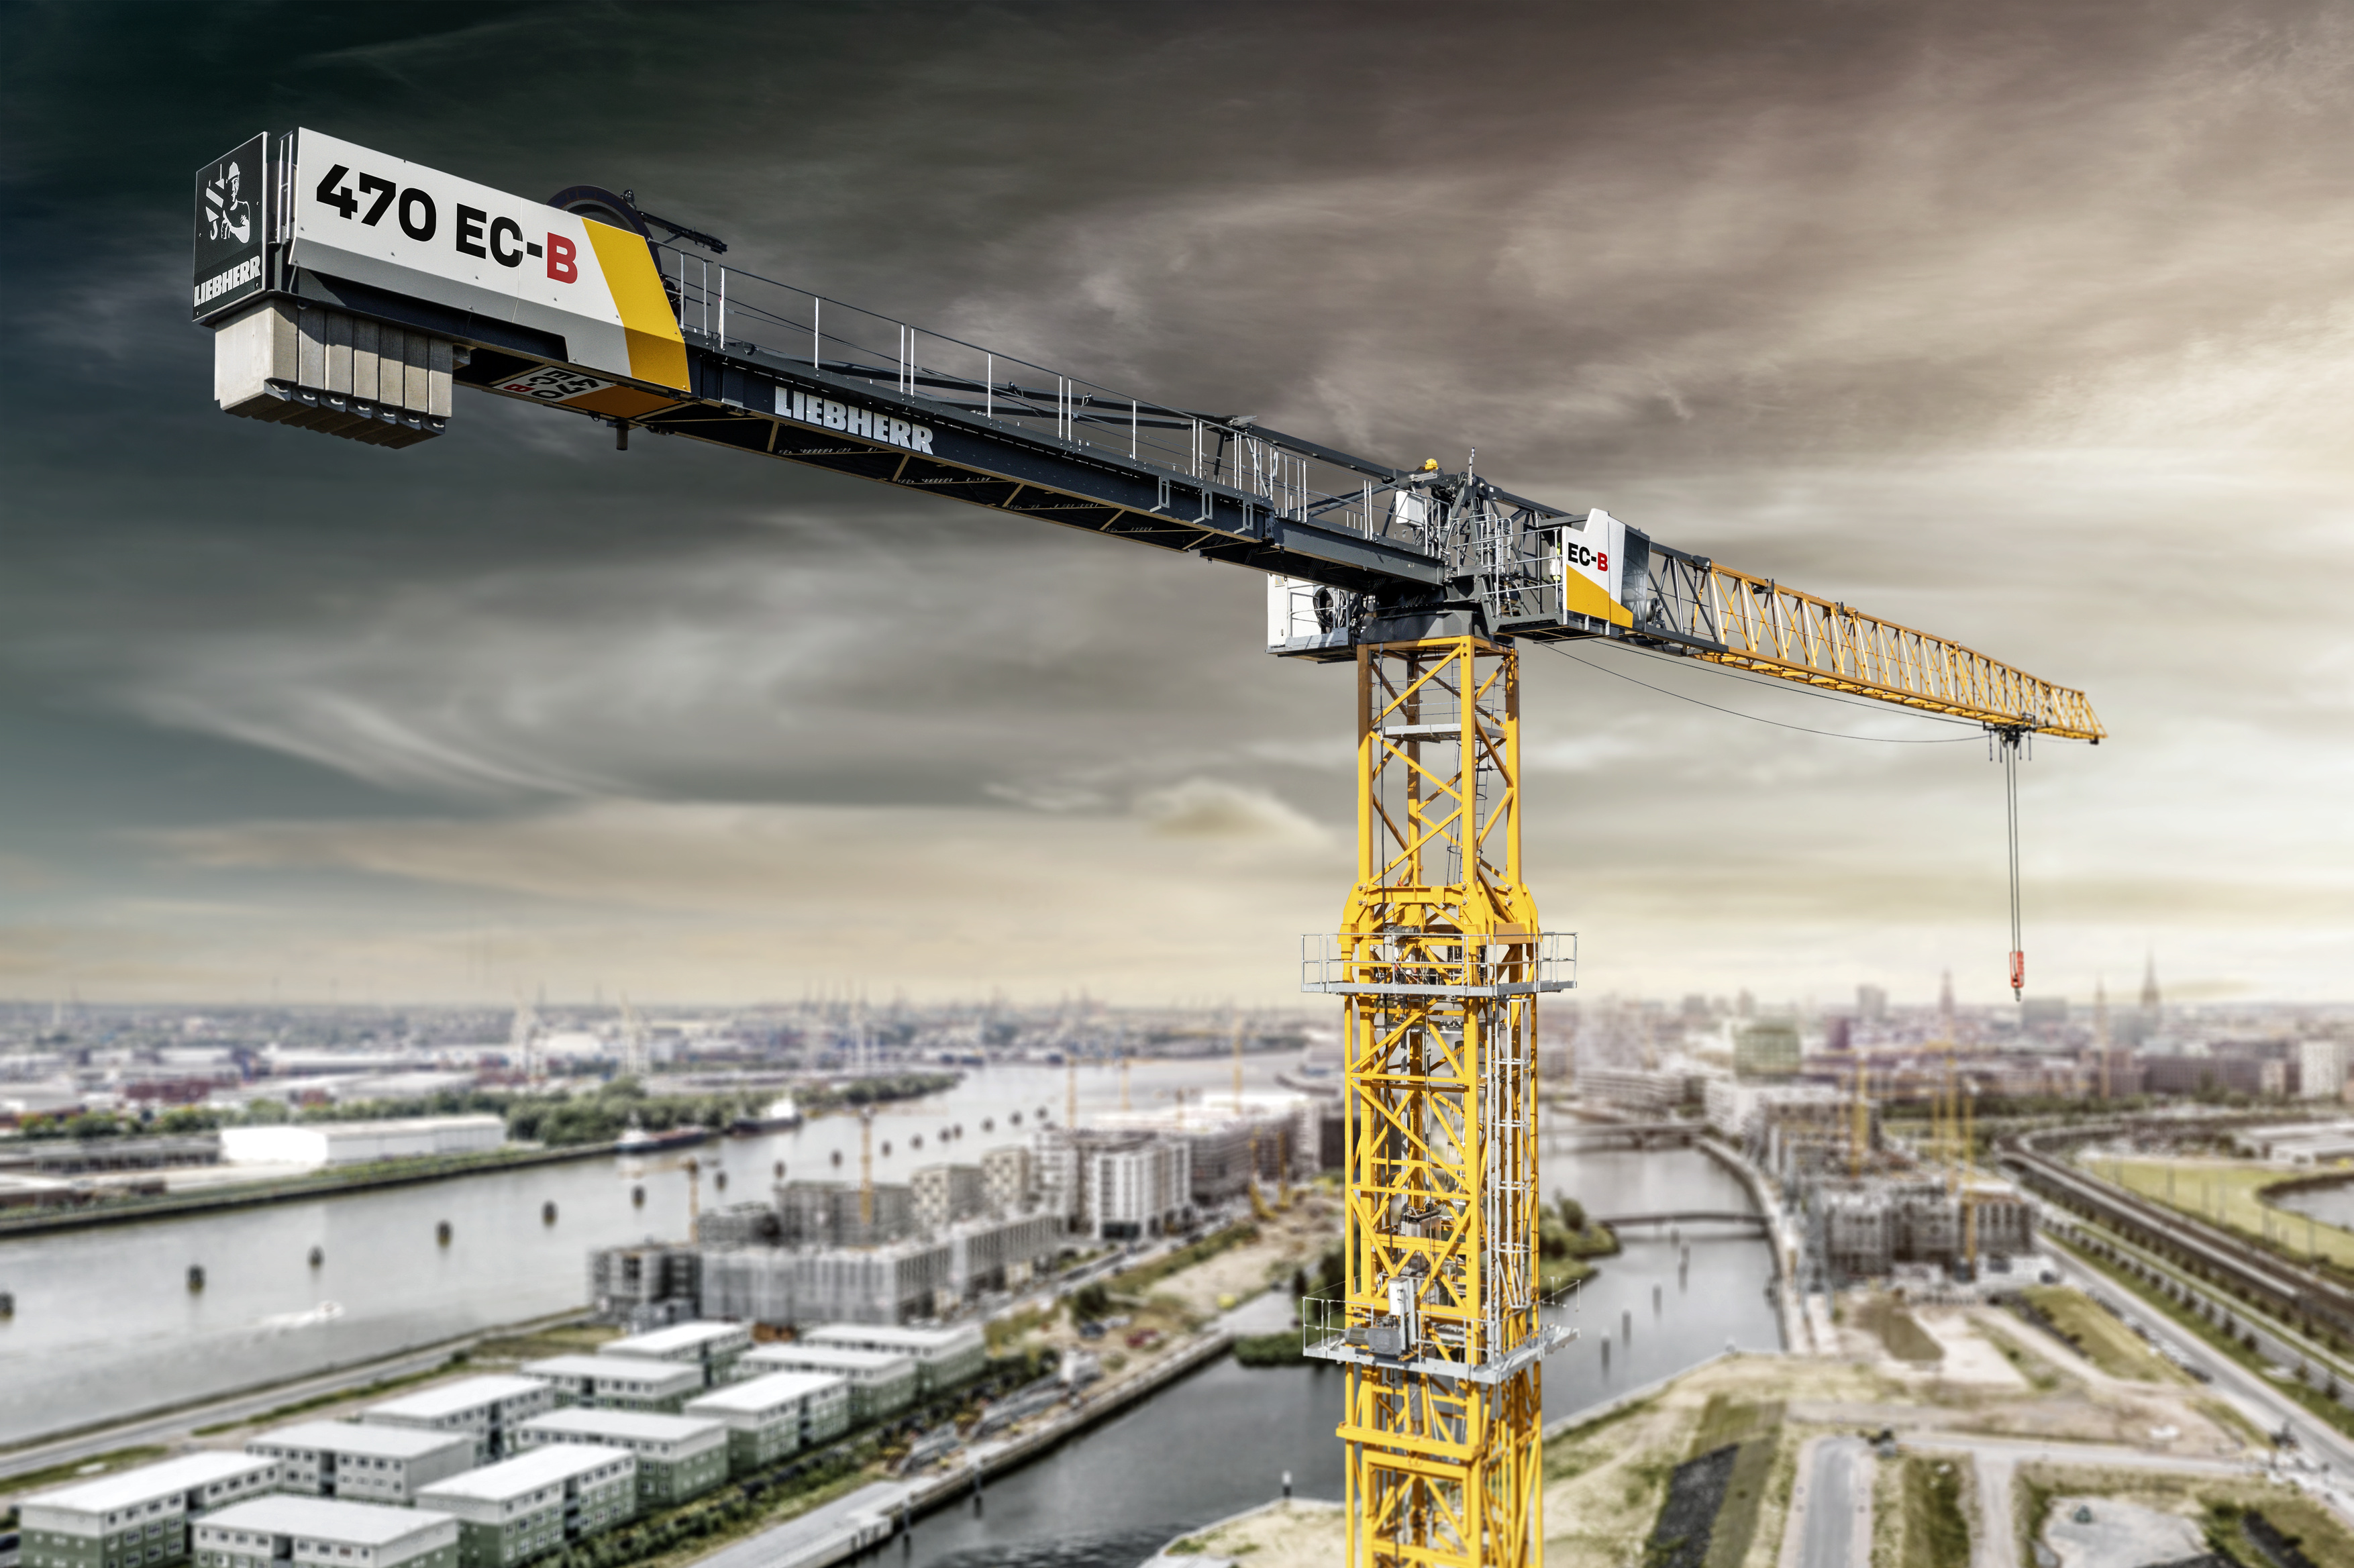 The largest in the “Tough Ones” series: Liebherr presents its 470 EC-B Flat-Top crane | LECTURA Press